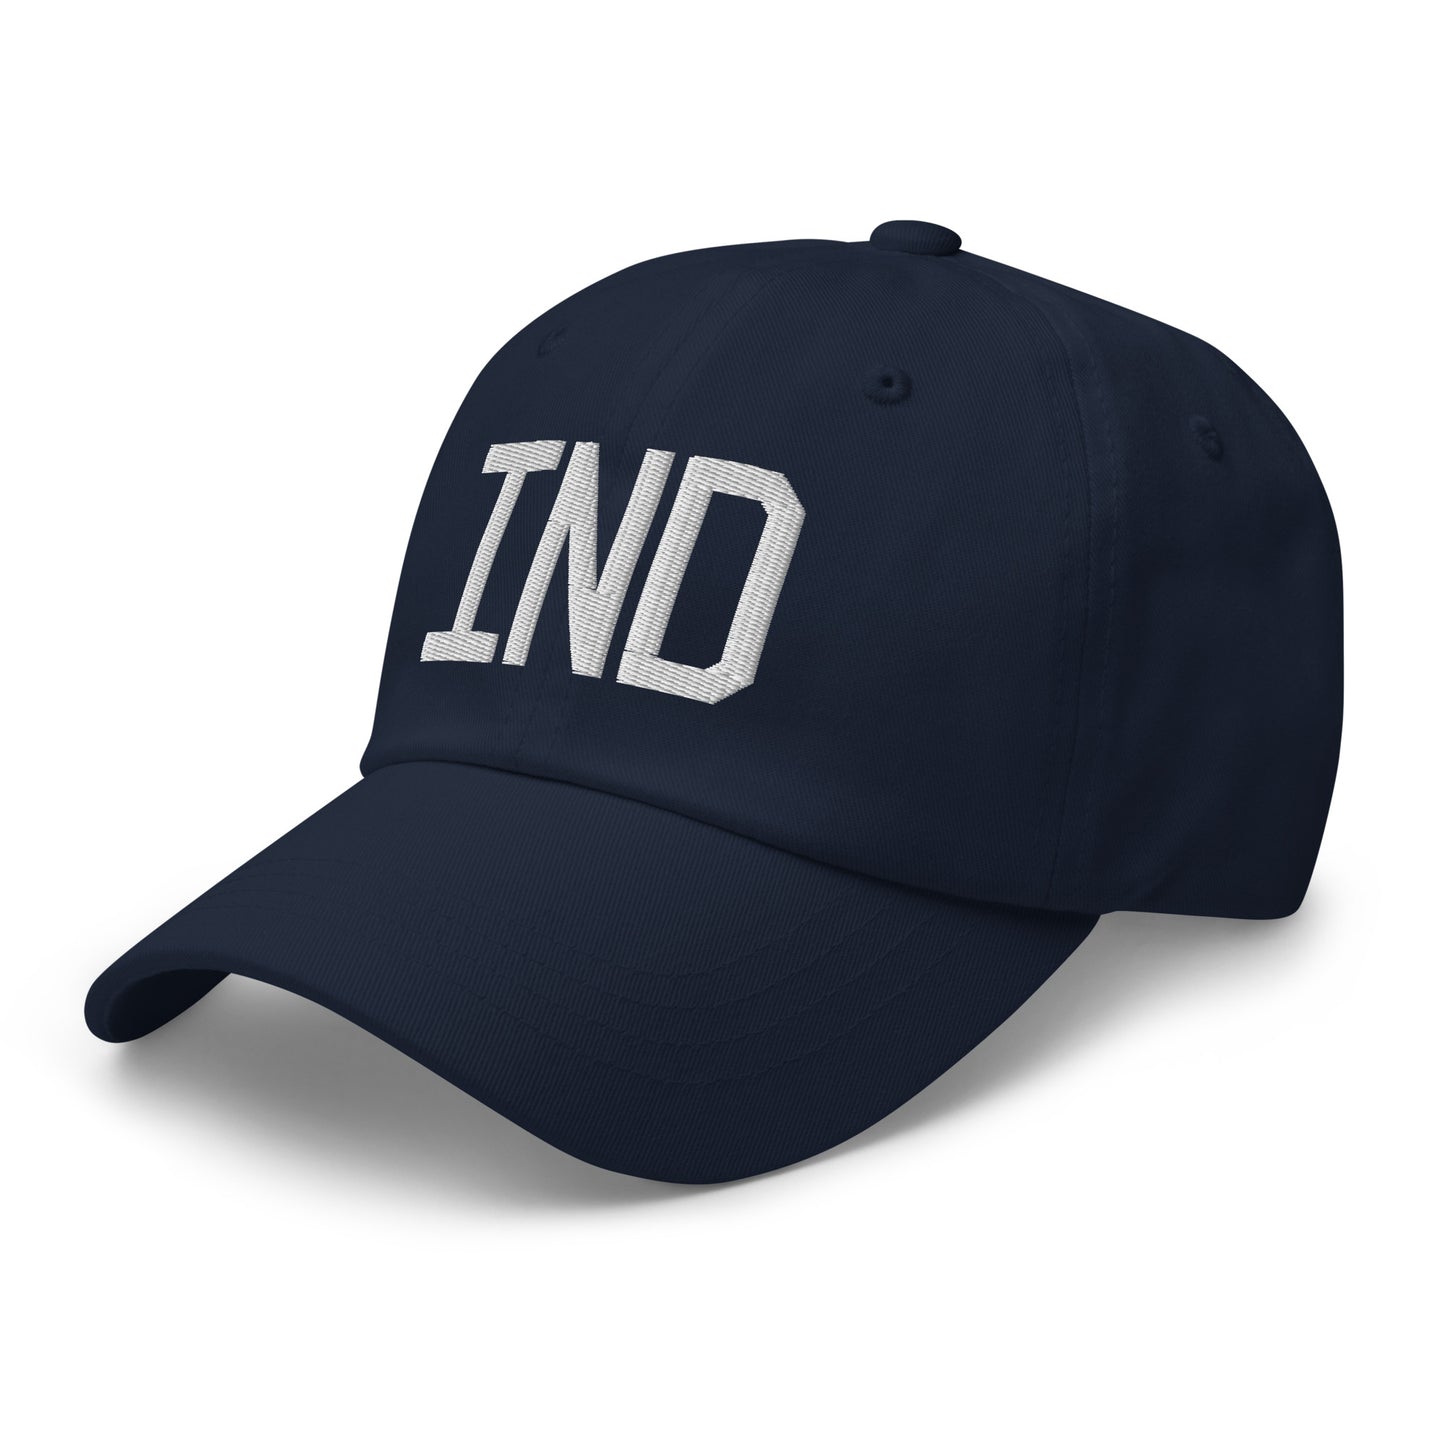 Airport Code Baseball Cap - White • IND Indianapolis • YHM Designs - Image 18